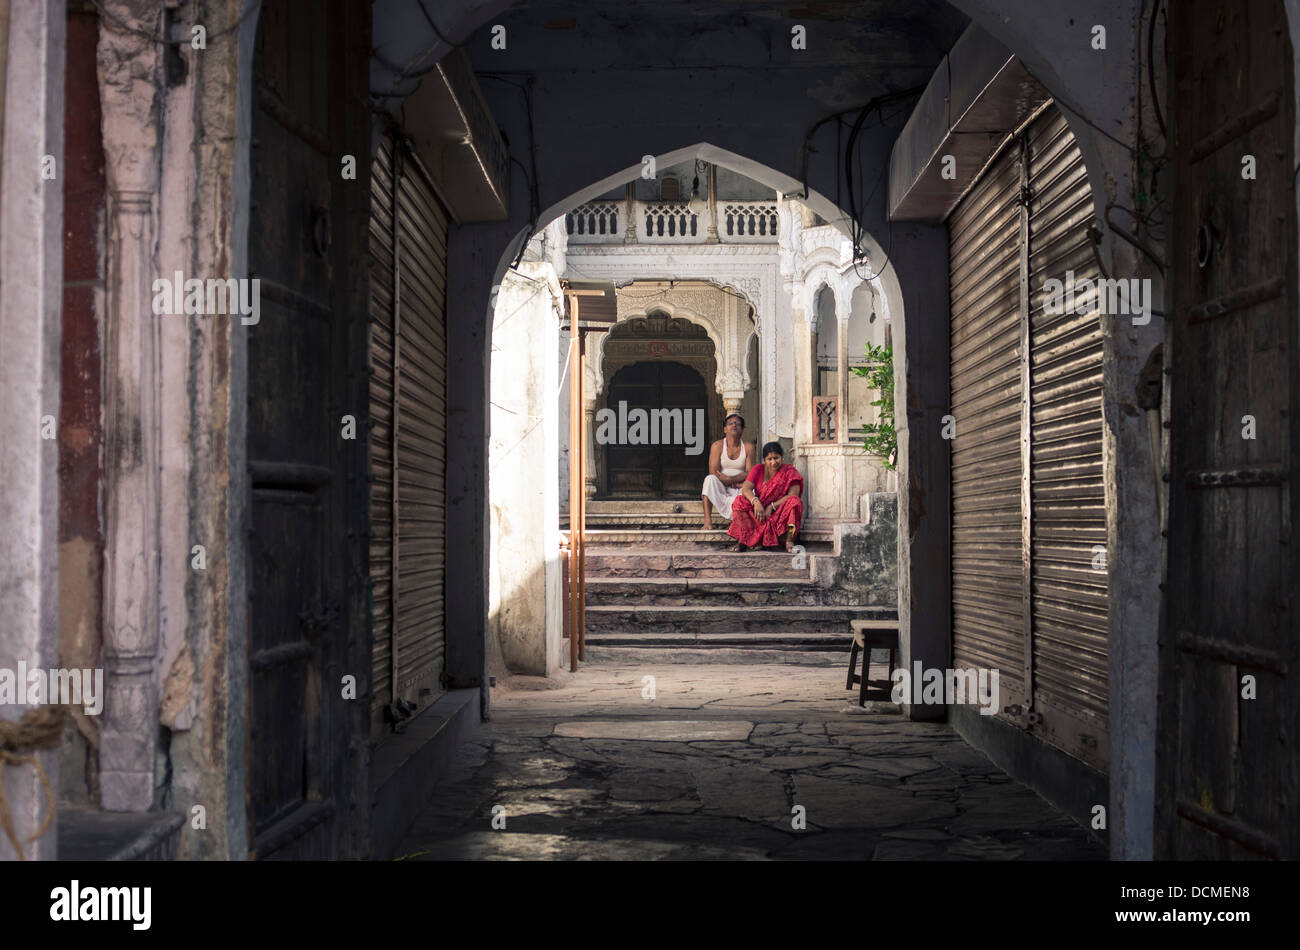 An Indian couple sitting outside the home at Jaipur, Rajasthan, India Stock Photo